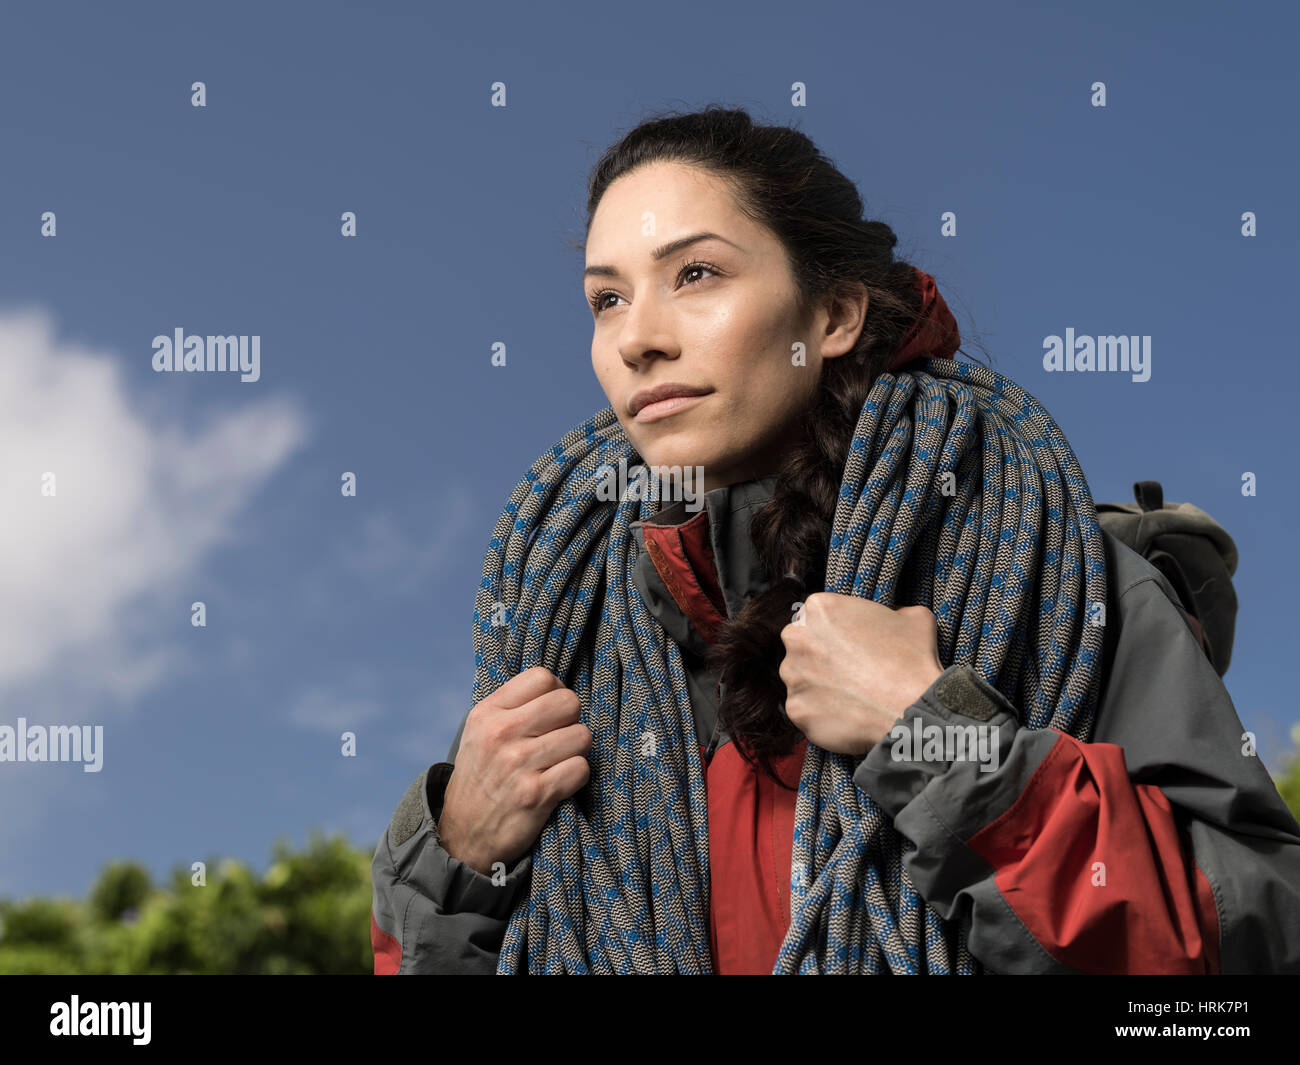 Woman mountain climber with jacket and rope Stock Photo